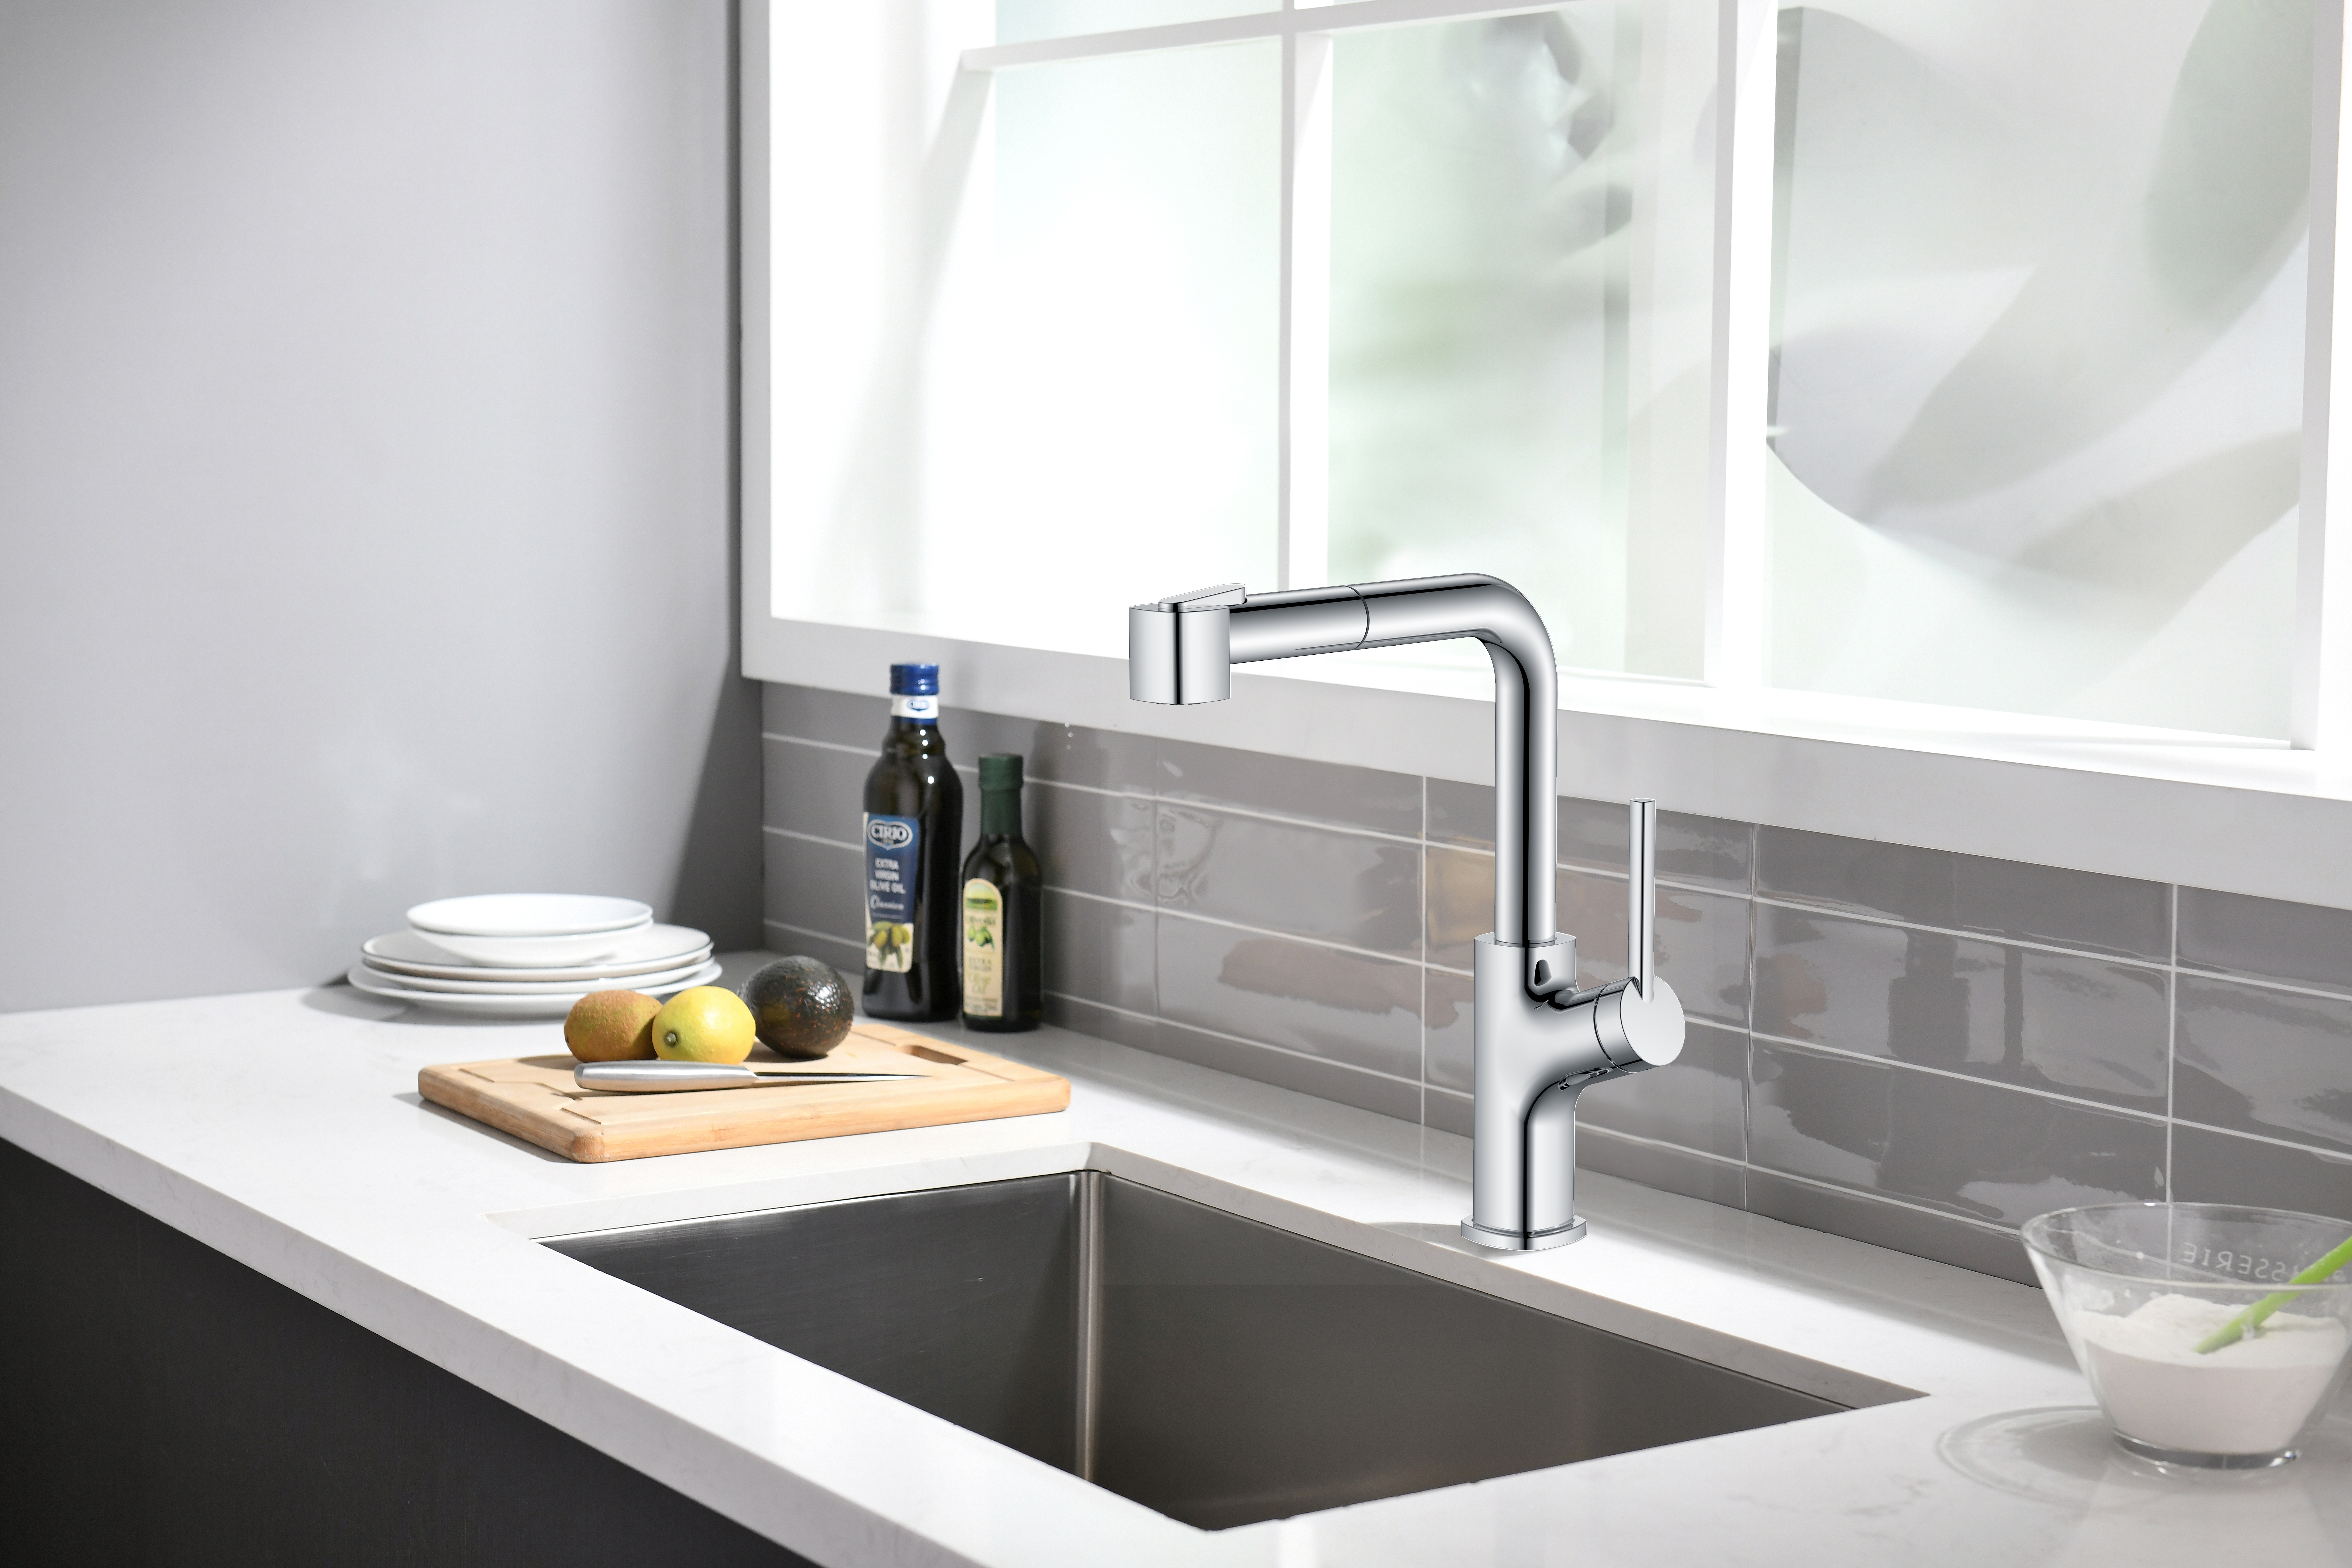 Choosing a Pull Down or Touchless Kitchen Faucet